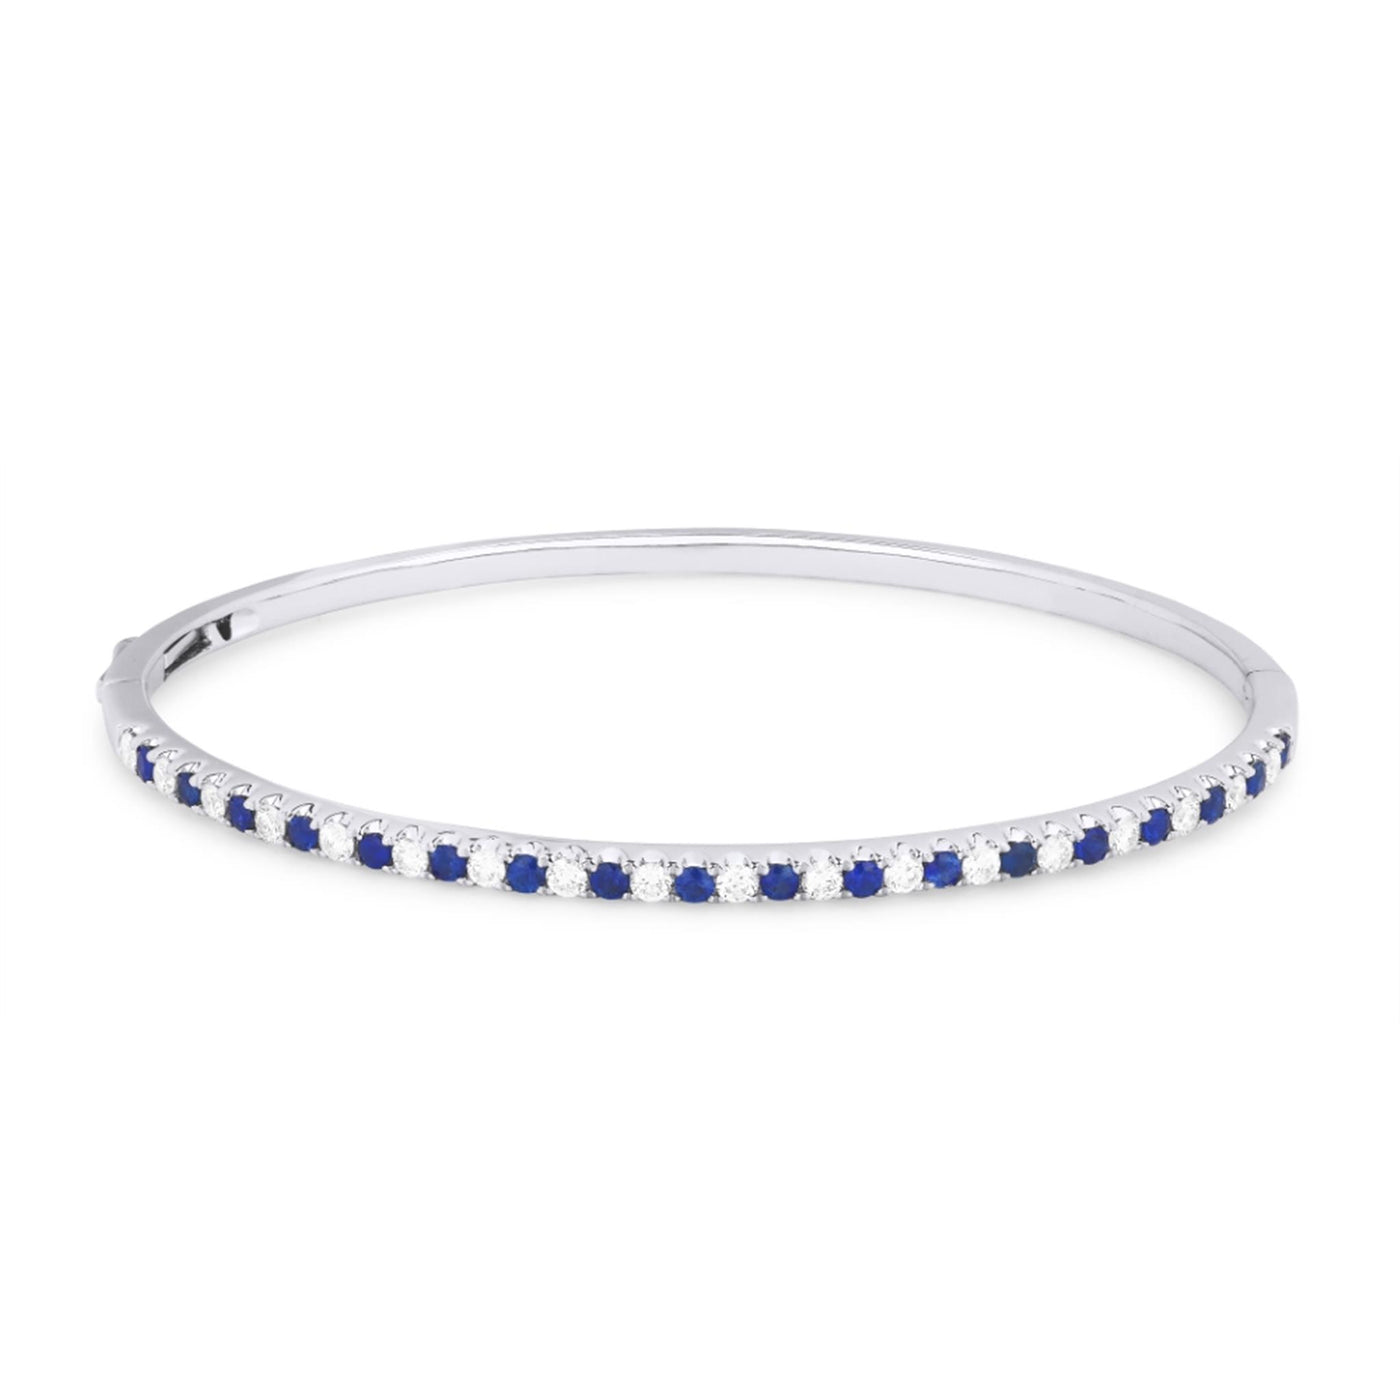 14K White Gold 6.5" Oval Bangle Style Bracelet Featuring Sapphires and Diamonds